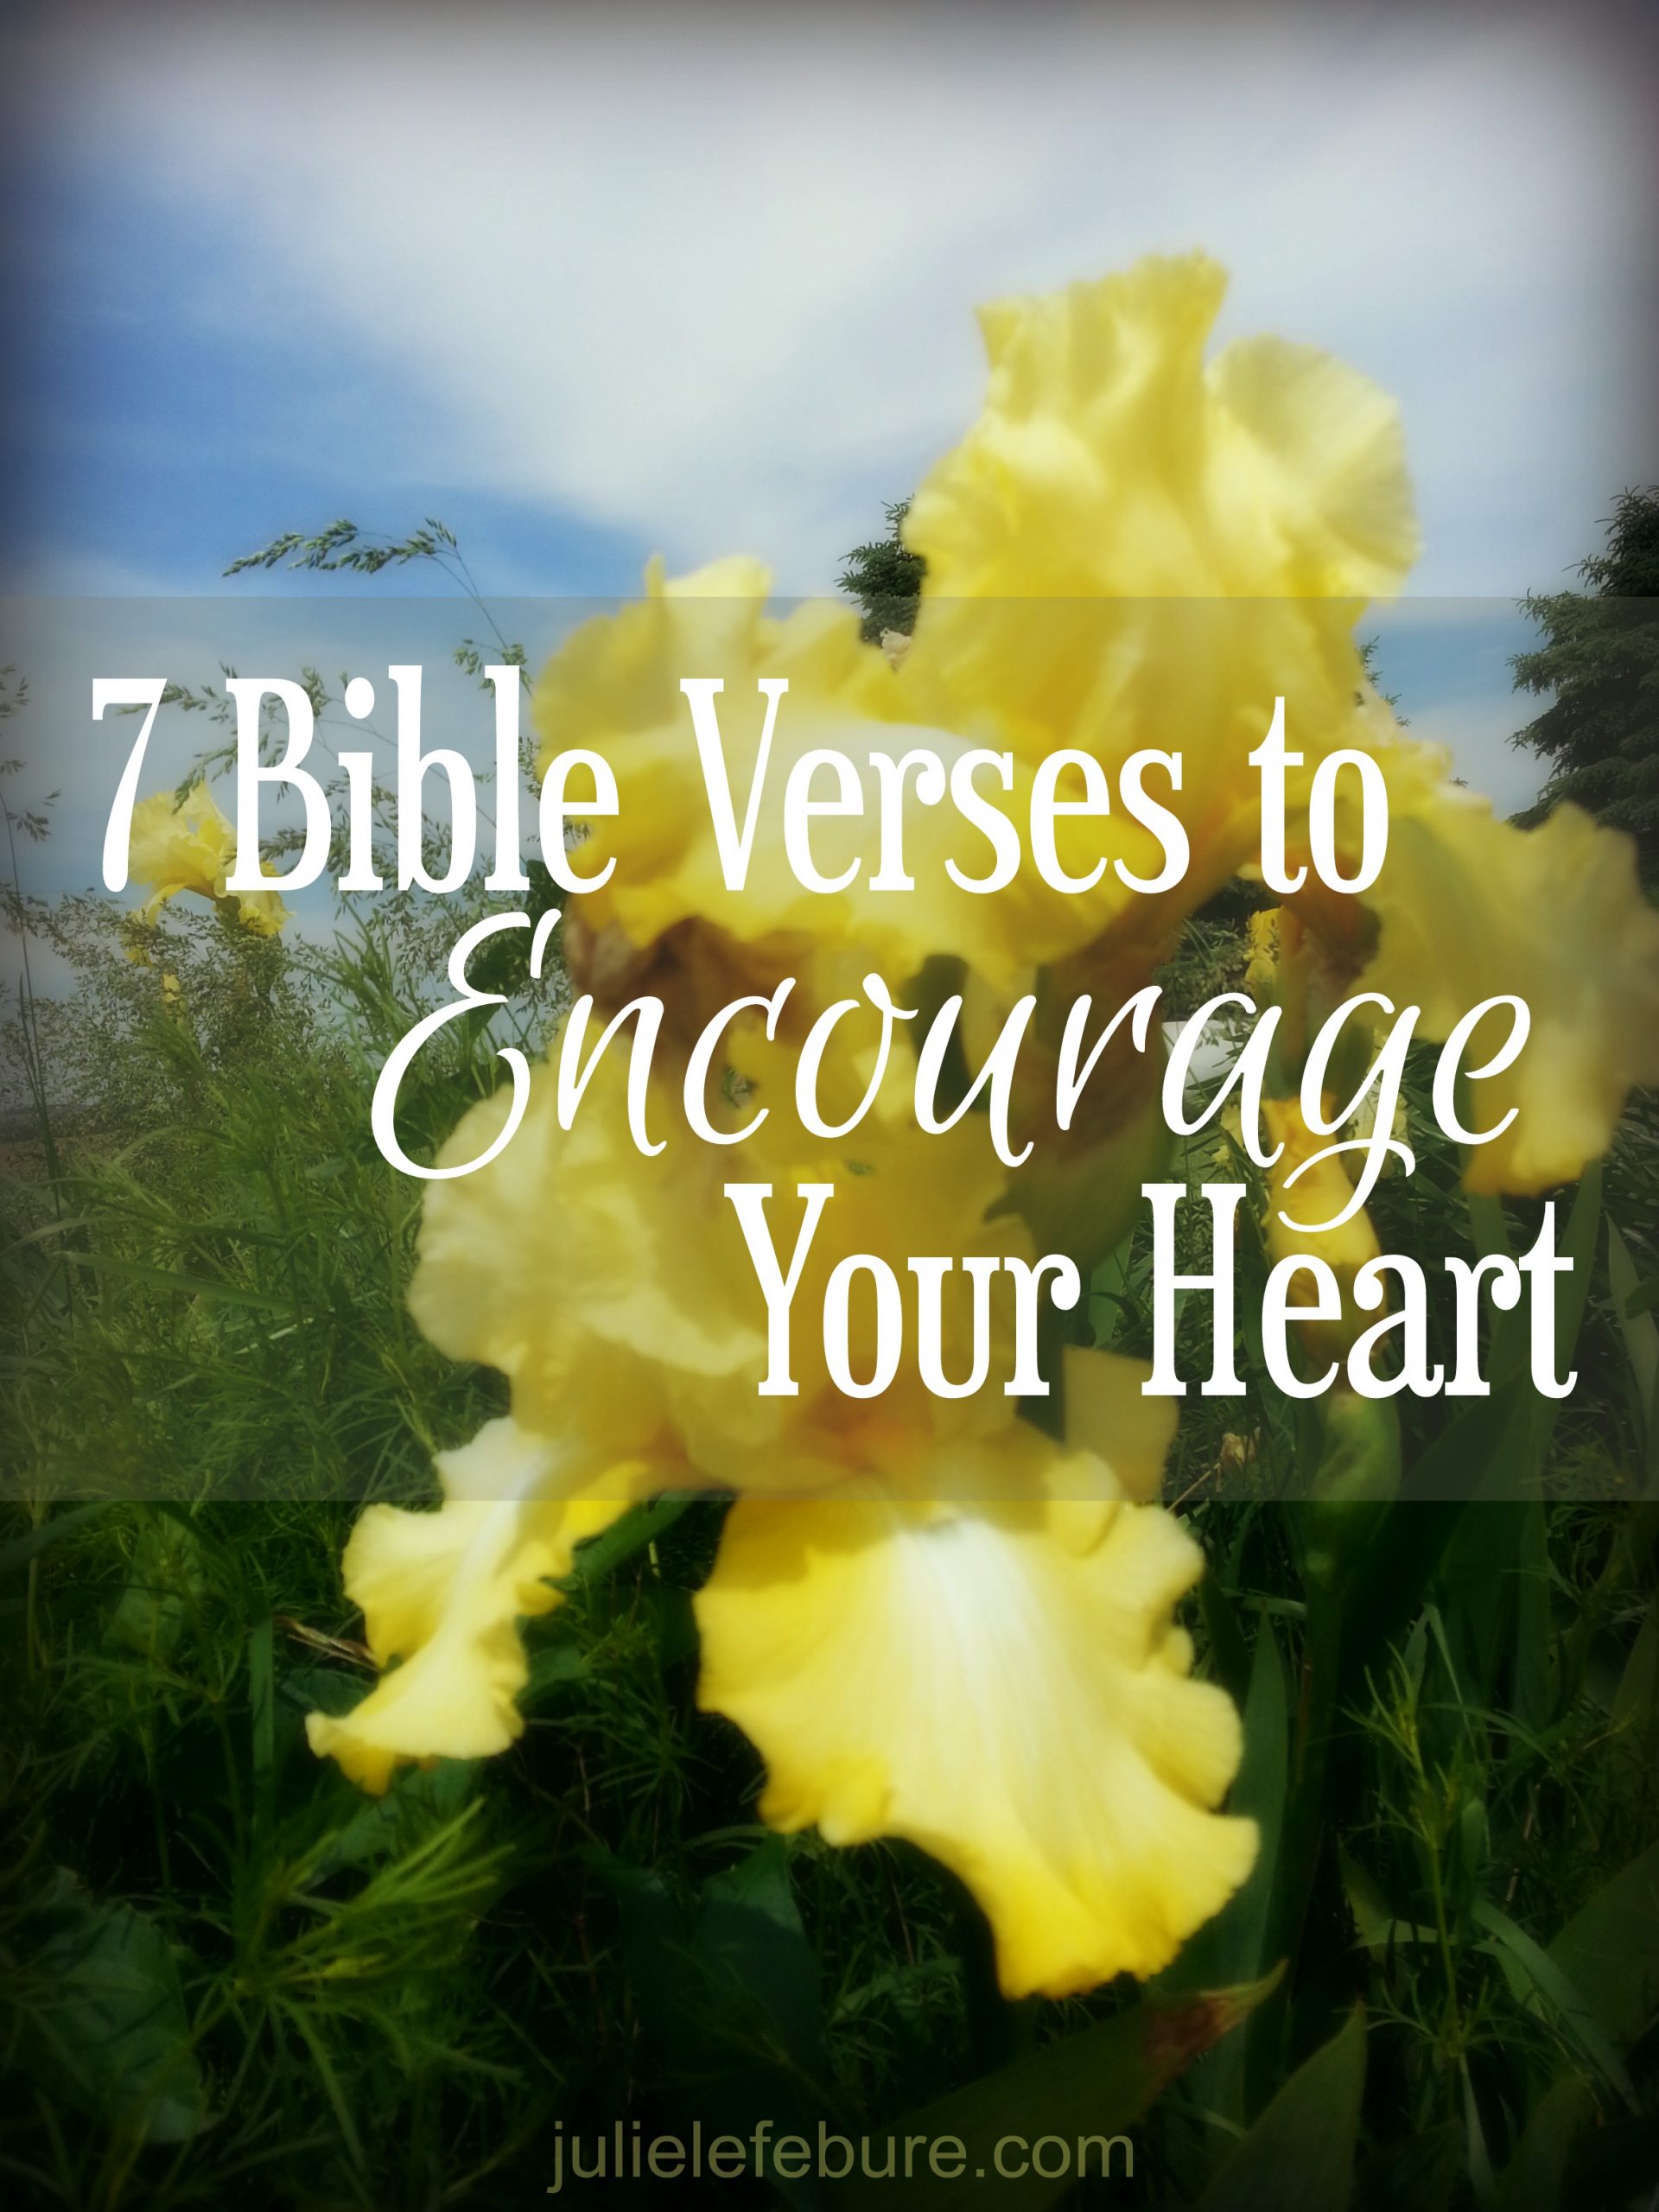 7 Bible Verses To Encourage Your Heart